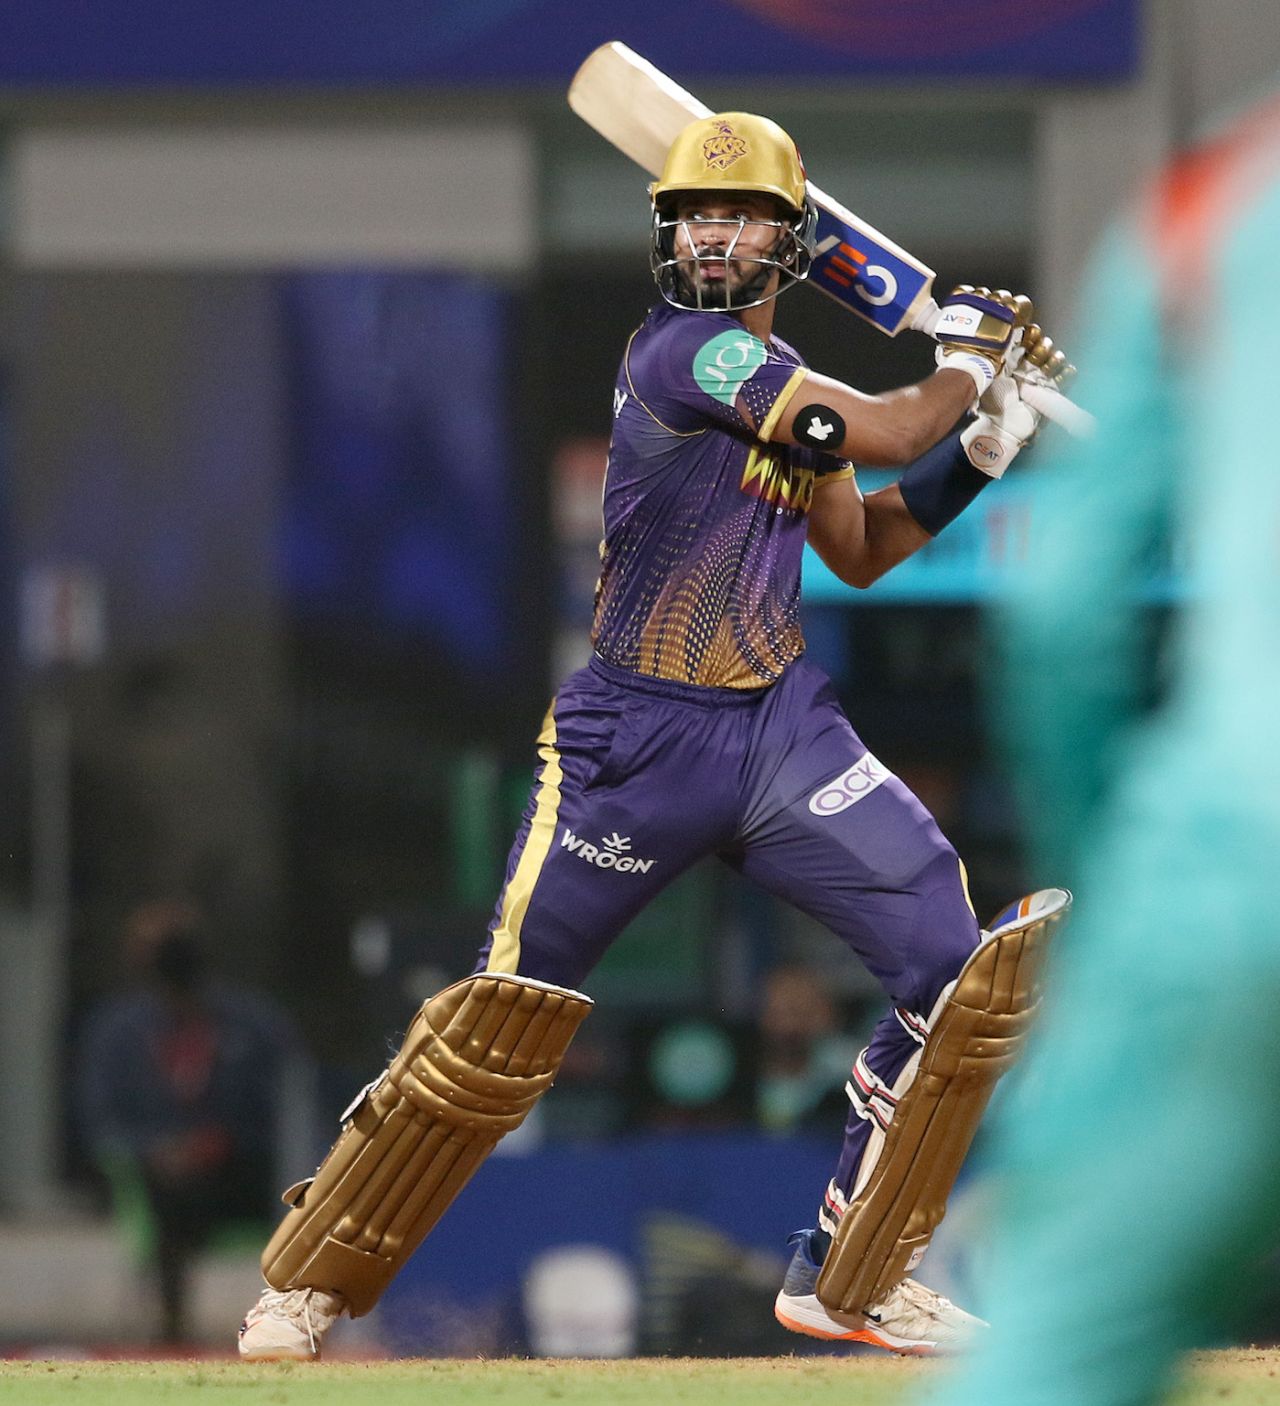 It was a huge chase, but Shreyas Iyer wasn't about to give up, Kolkata Knight Riders vs Lucknow Super Giants, IPL 2022, DY Patil Stadium, Mumbai, May 18, 2022